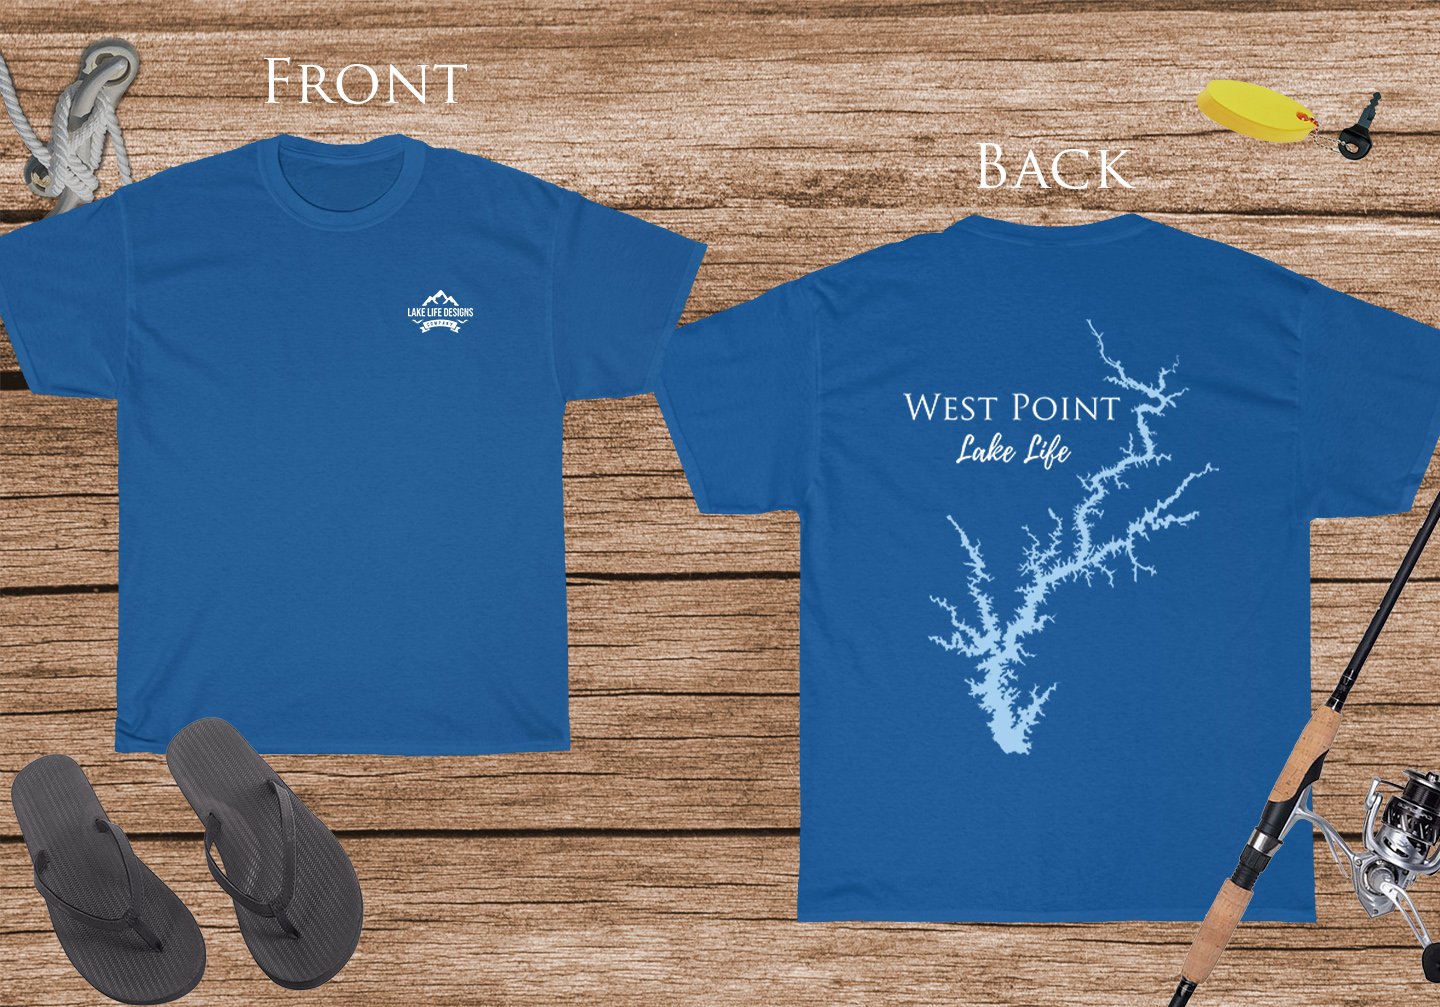 West Point Lake Life - Cotton Short Sleeved - FRONT & BACK PRINTED - Short Sleeved Cotton Tee - Georgia Lake